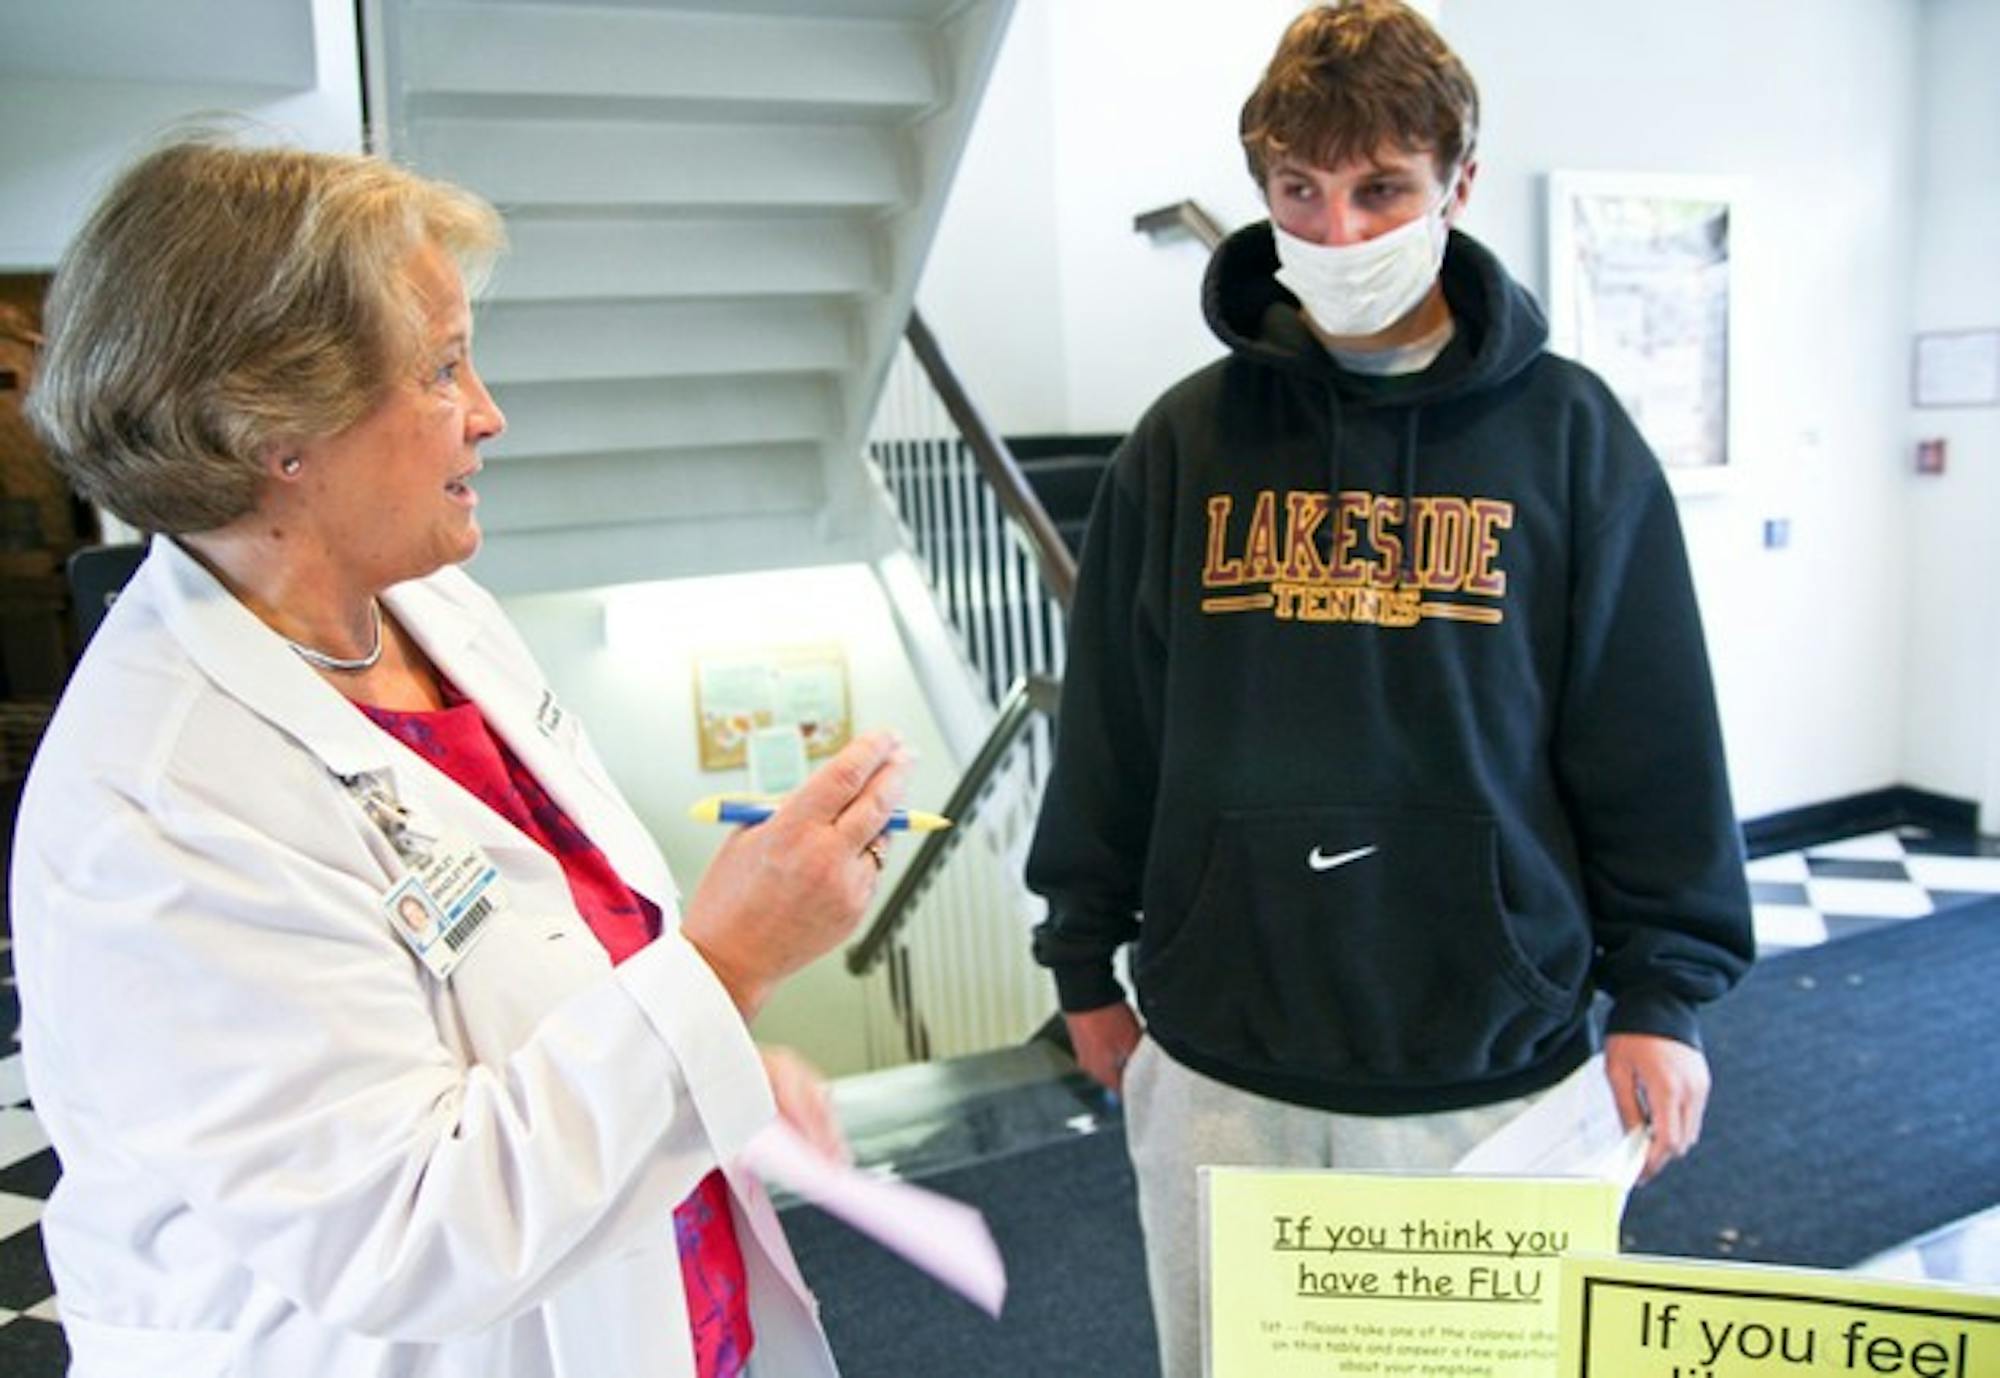 The College has asked undergraduate advisors to help estimate the number of flu cases on campus.